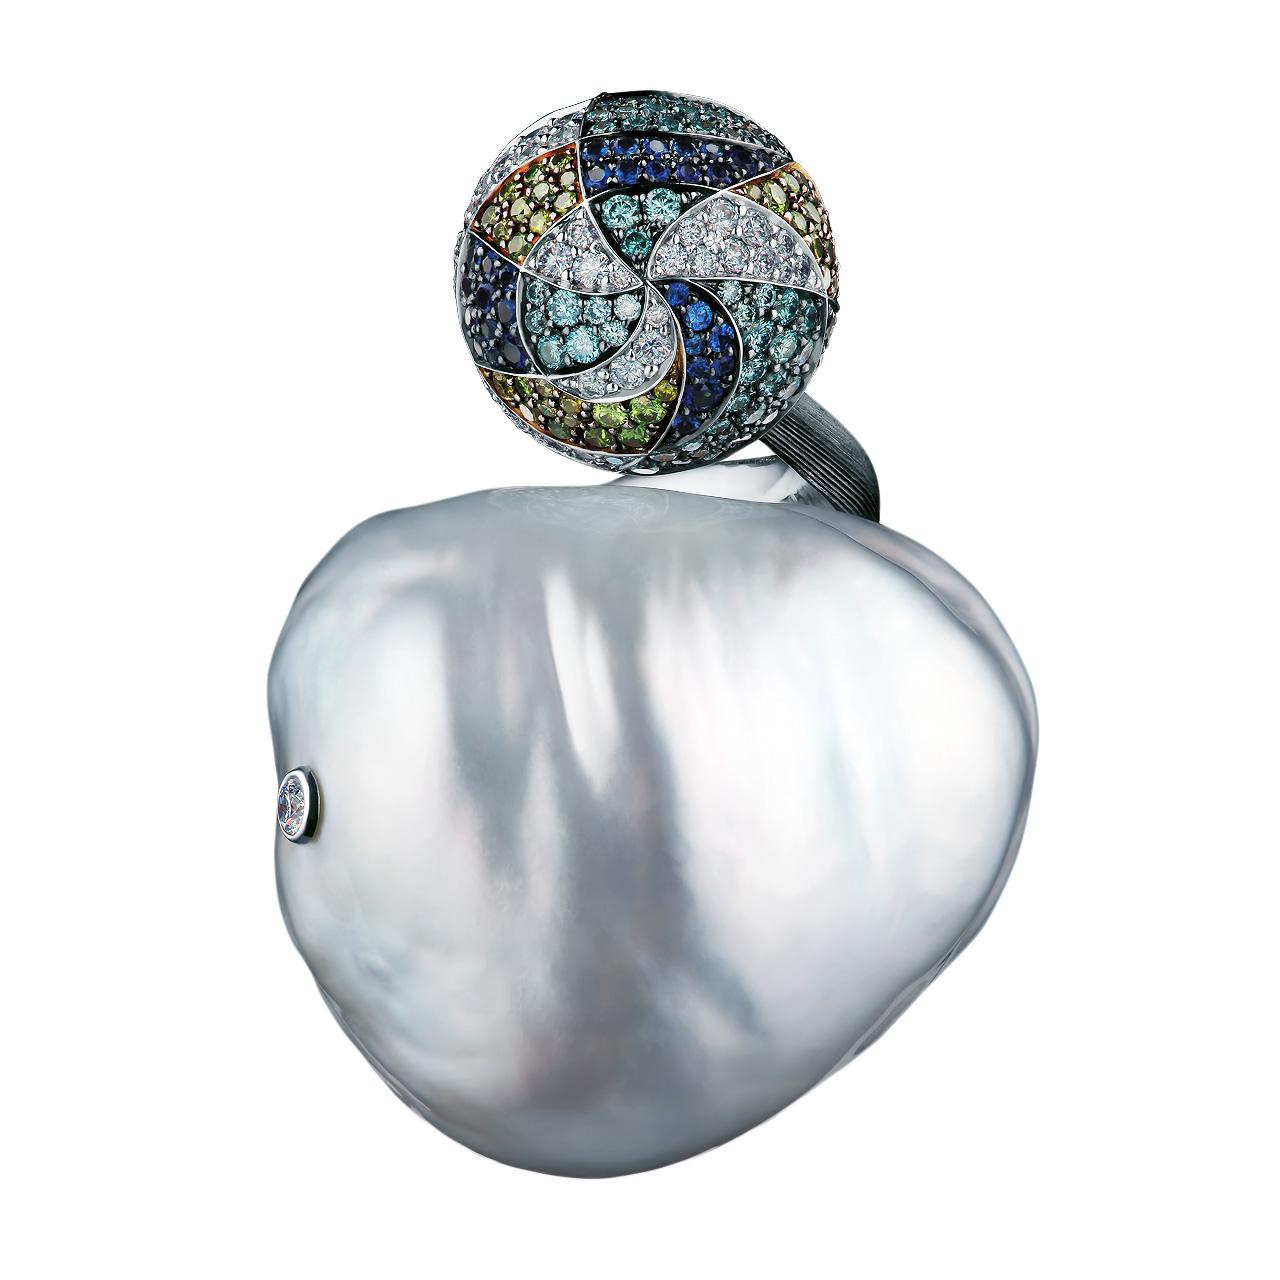 -- 96 Round Diamonds – 0.65 ct, D-F/Fl-VVS
- 100 Round Green Diamonds – 0.71 ct
- 111 Round Blue Diamonds – 0.84 ct
- 101 Round Sapphires– 0.87 ct
- 1 White South Sea Baroque pearl 27.53*25.65*24.40 mm
- 18K White Gold 
- Weight: 28.49 g
- Size: